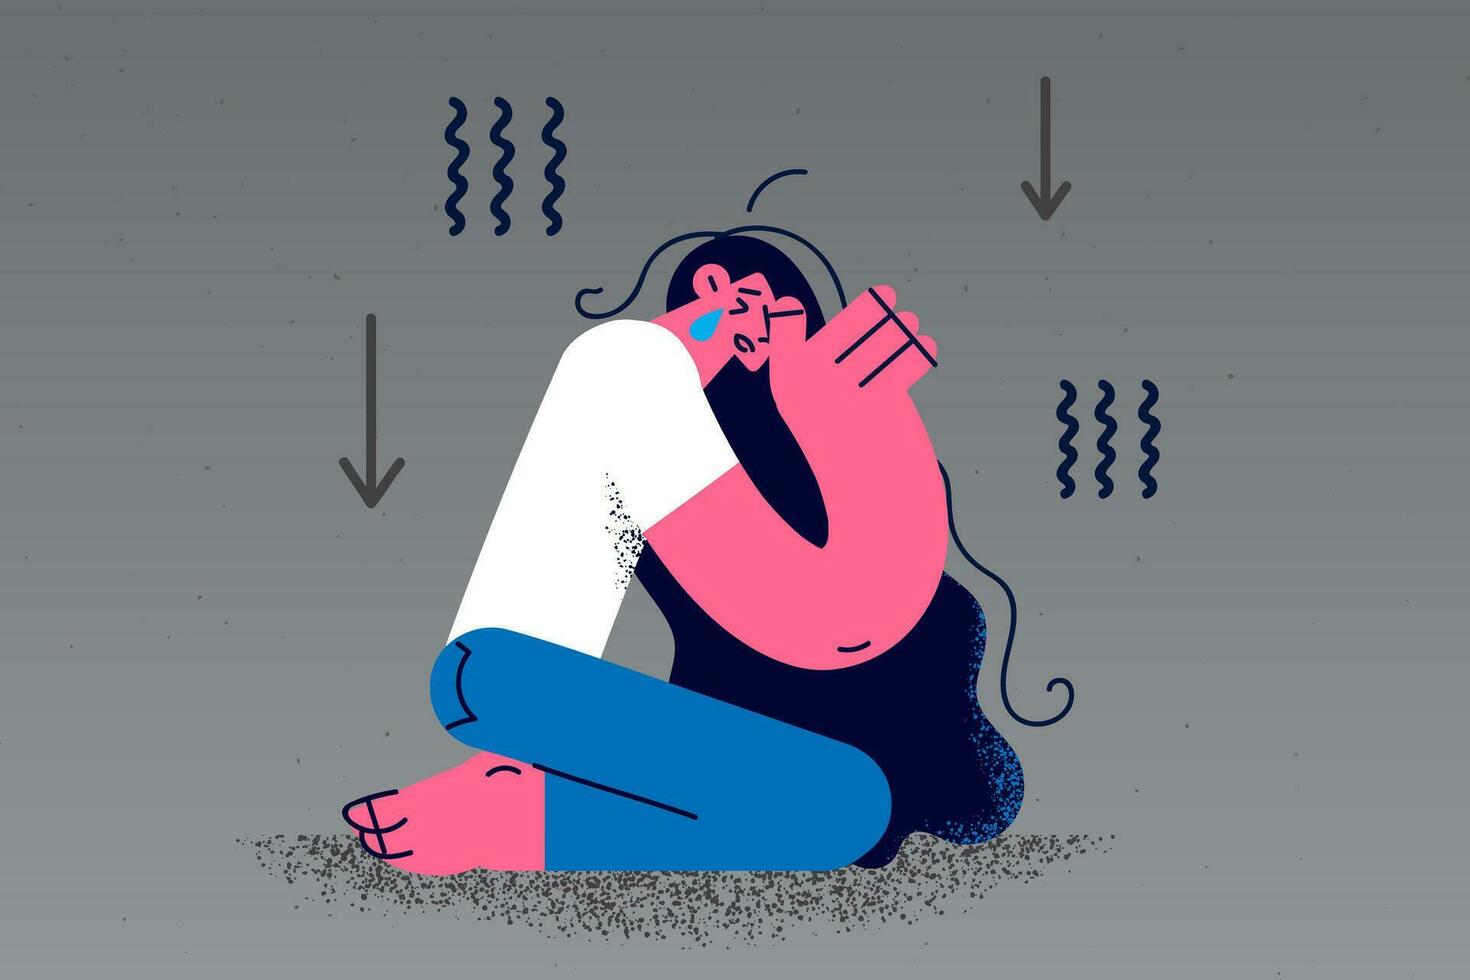 Unhappy young woman cry feel depressed suffer from anxiety or panic attack. Upset girl distressed struggle with depression mental breakdown or disorder. Psychological help. Vector illustration.